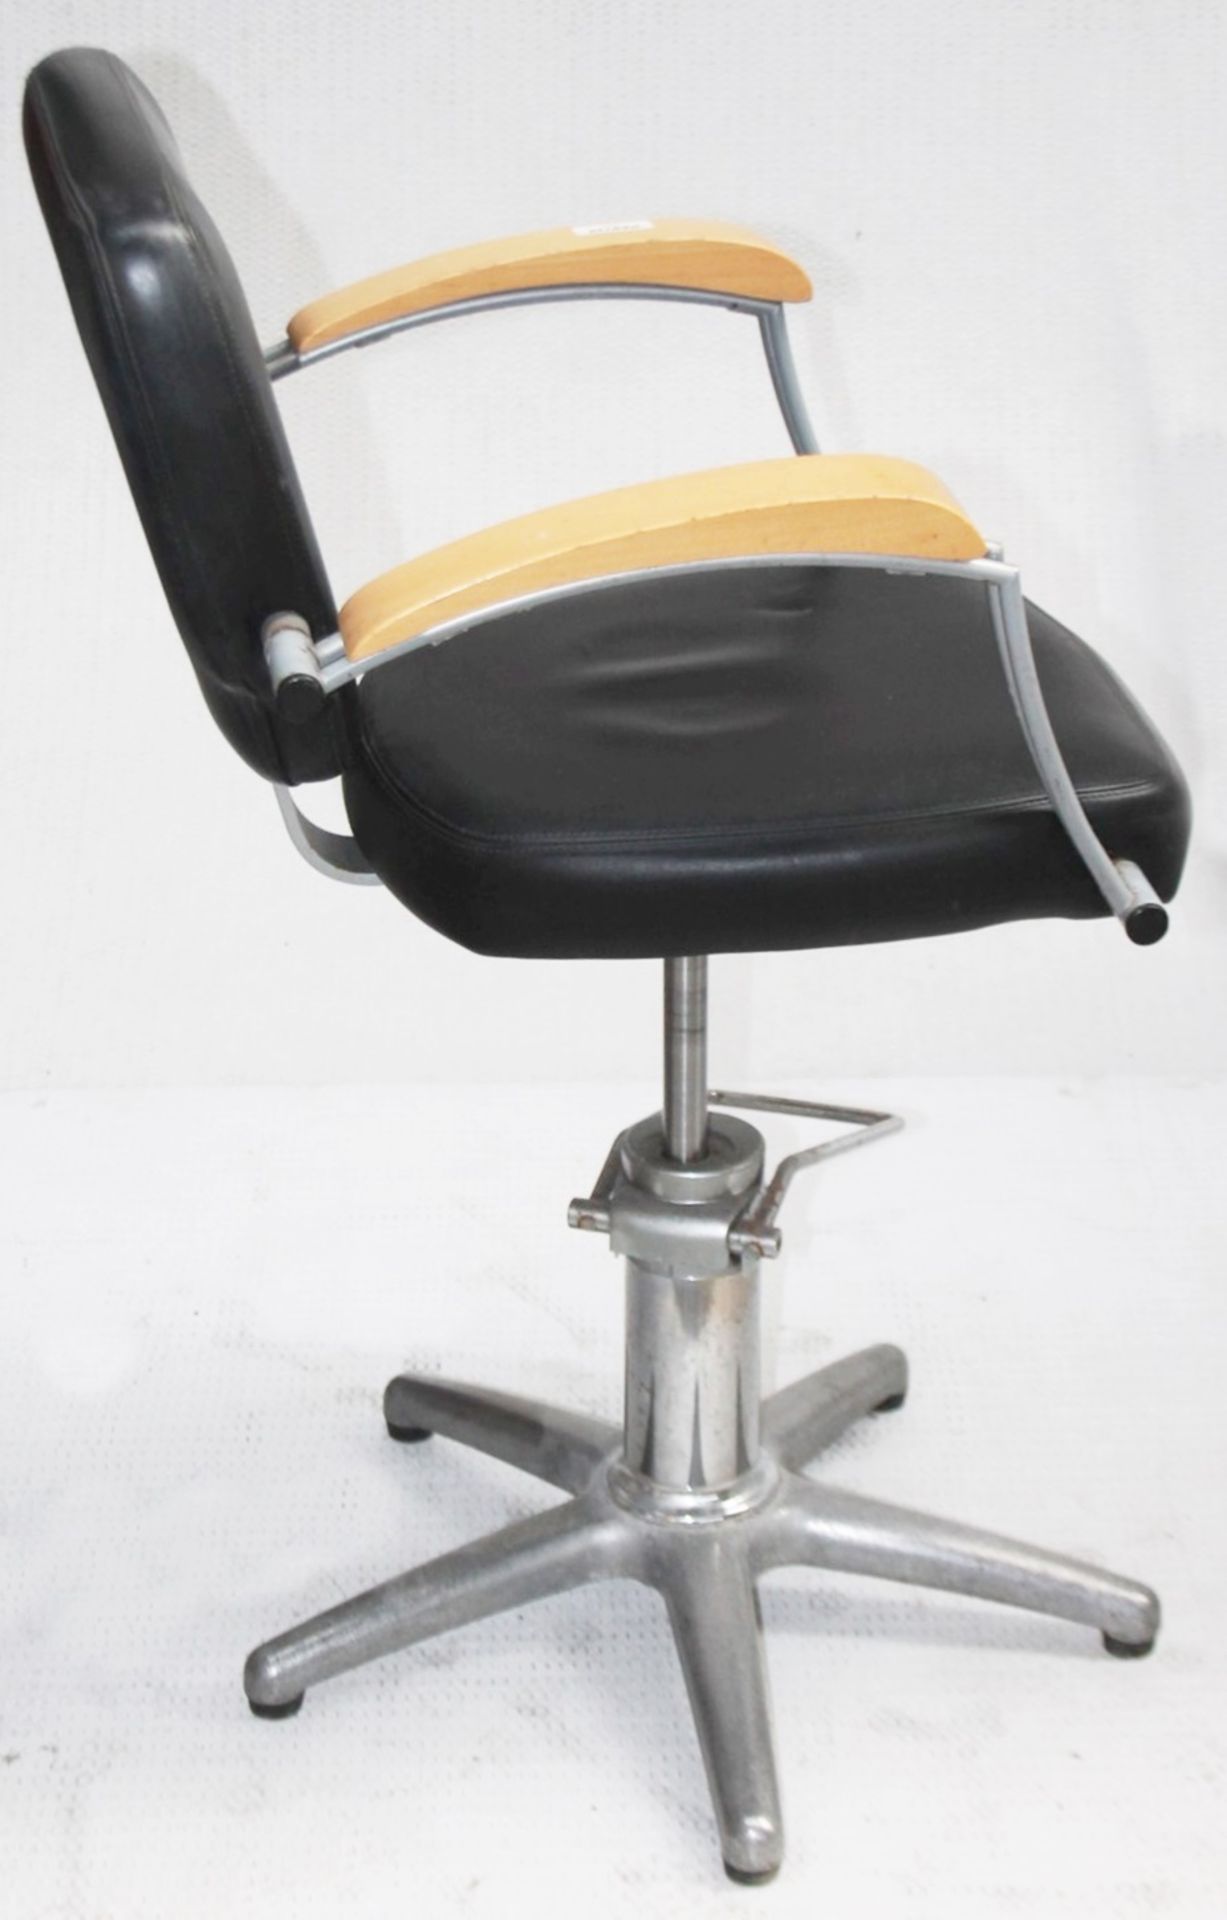 1 x Adjustable Black Hydraulic Barber Hairdressing Chair - Recently Removed From A Boutique Hair - Image 8 of 11